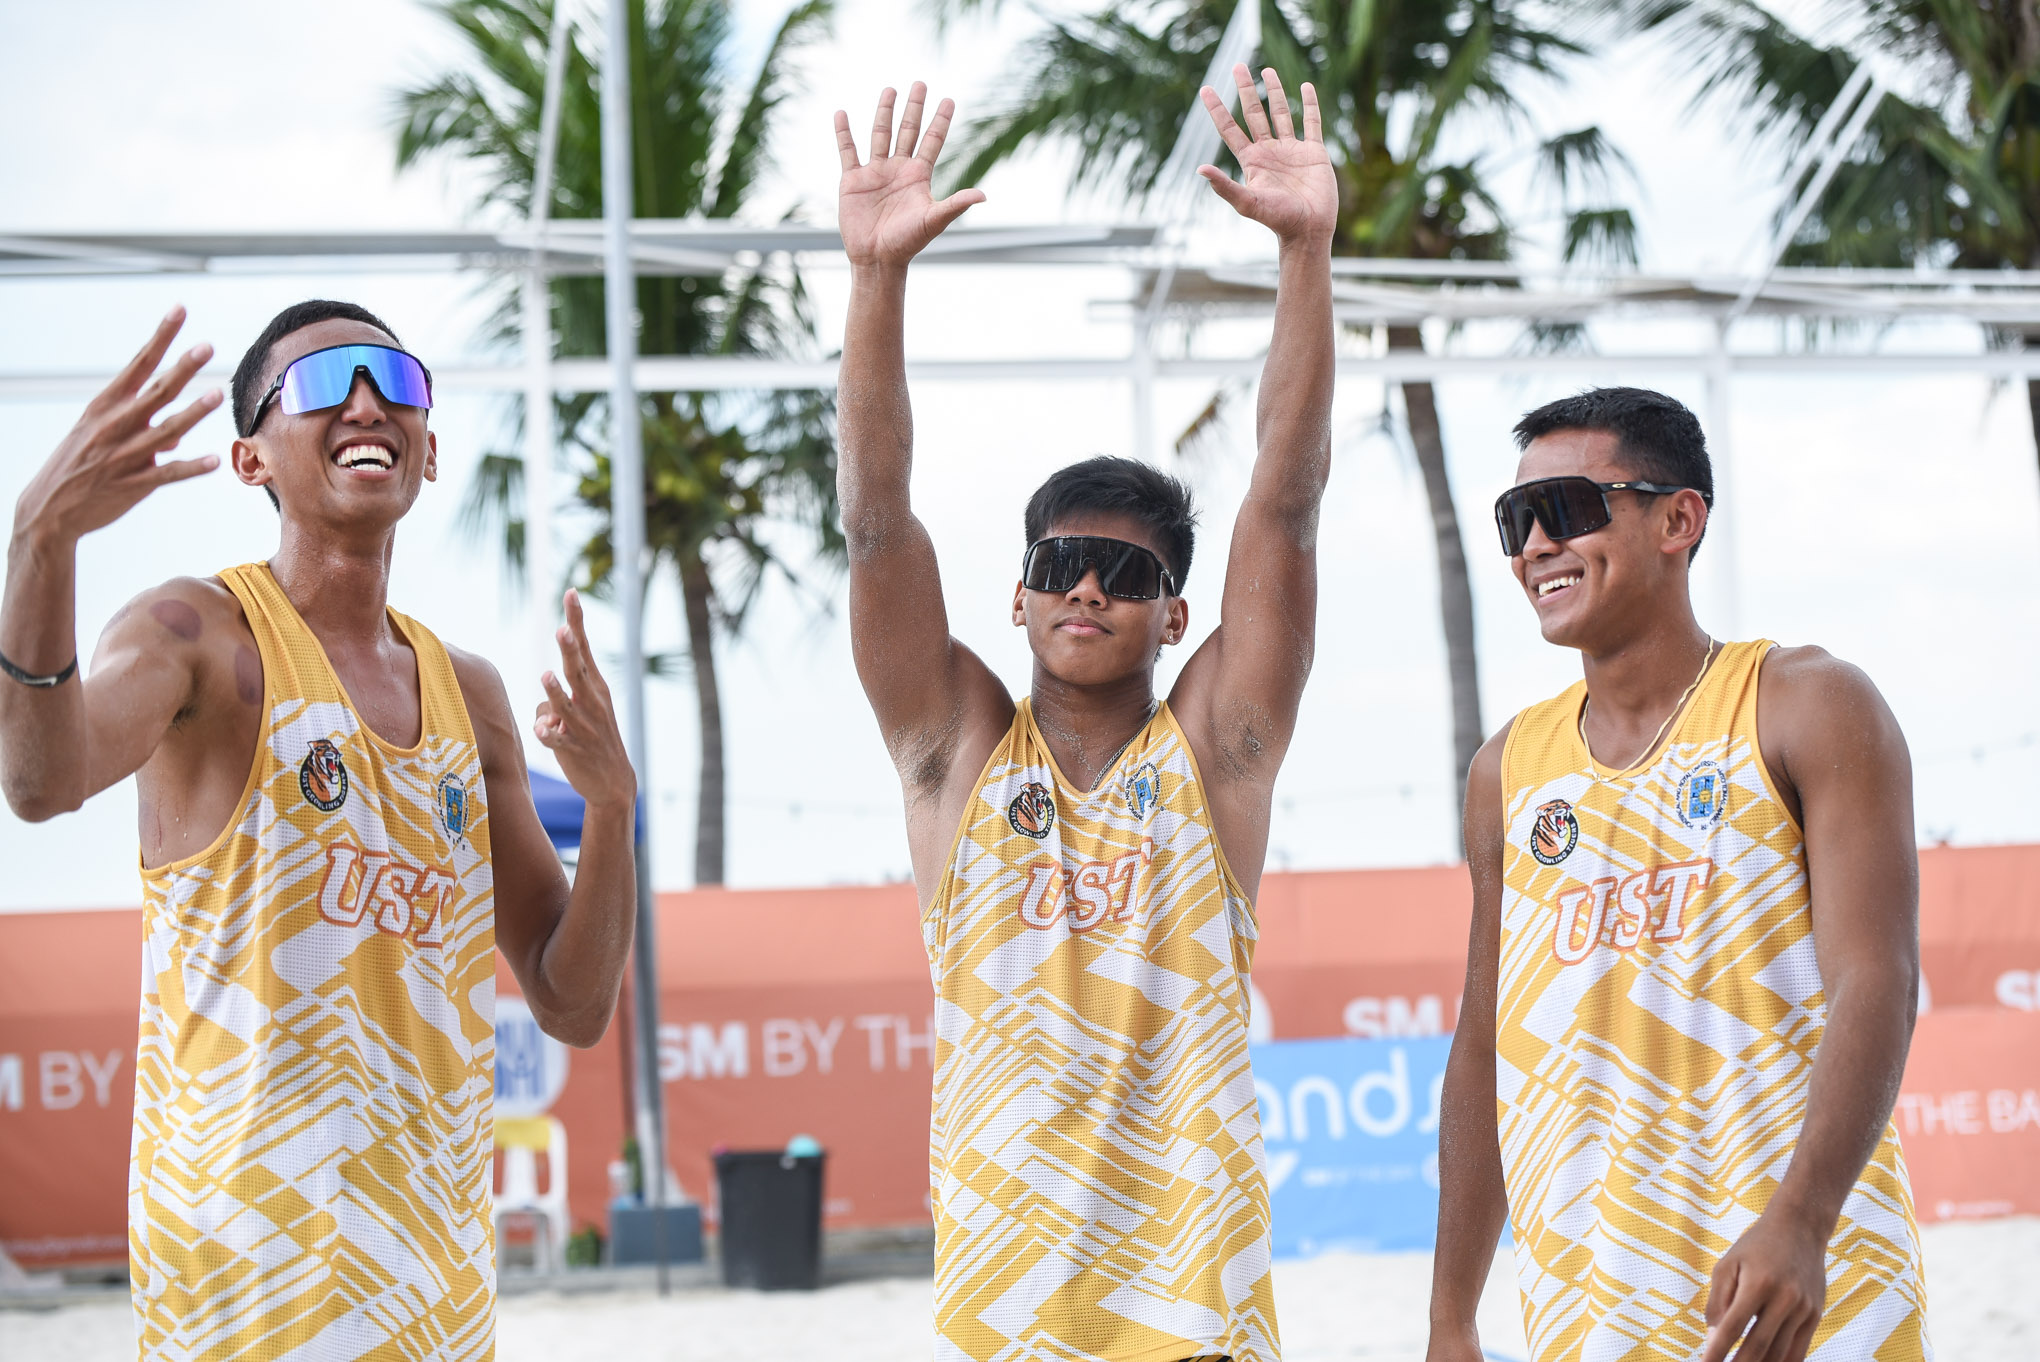 UAAP-MBVB-UST-2 UAAP 85 MBVB: UST's Requinton-Varga downs NU's Buytrago-Salvador for fourth straight crown ADMU Beach Volleyball FEU News NU UAAP UST  - philippine sports news